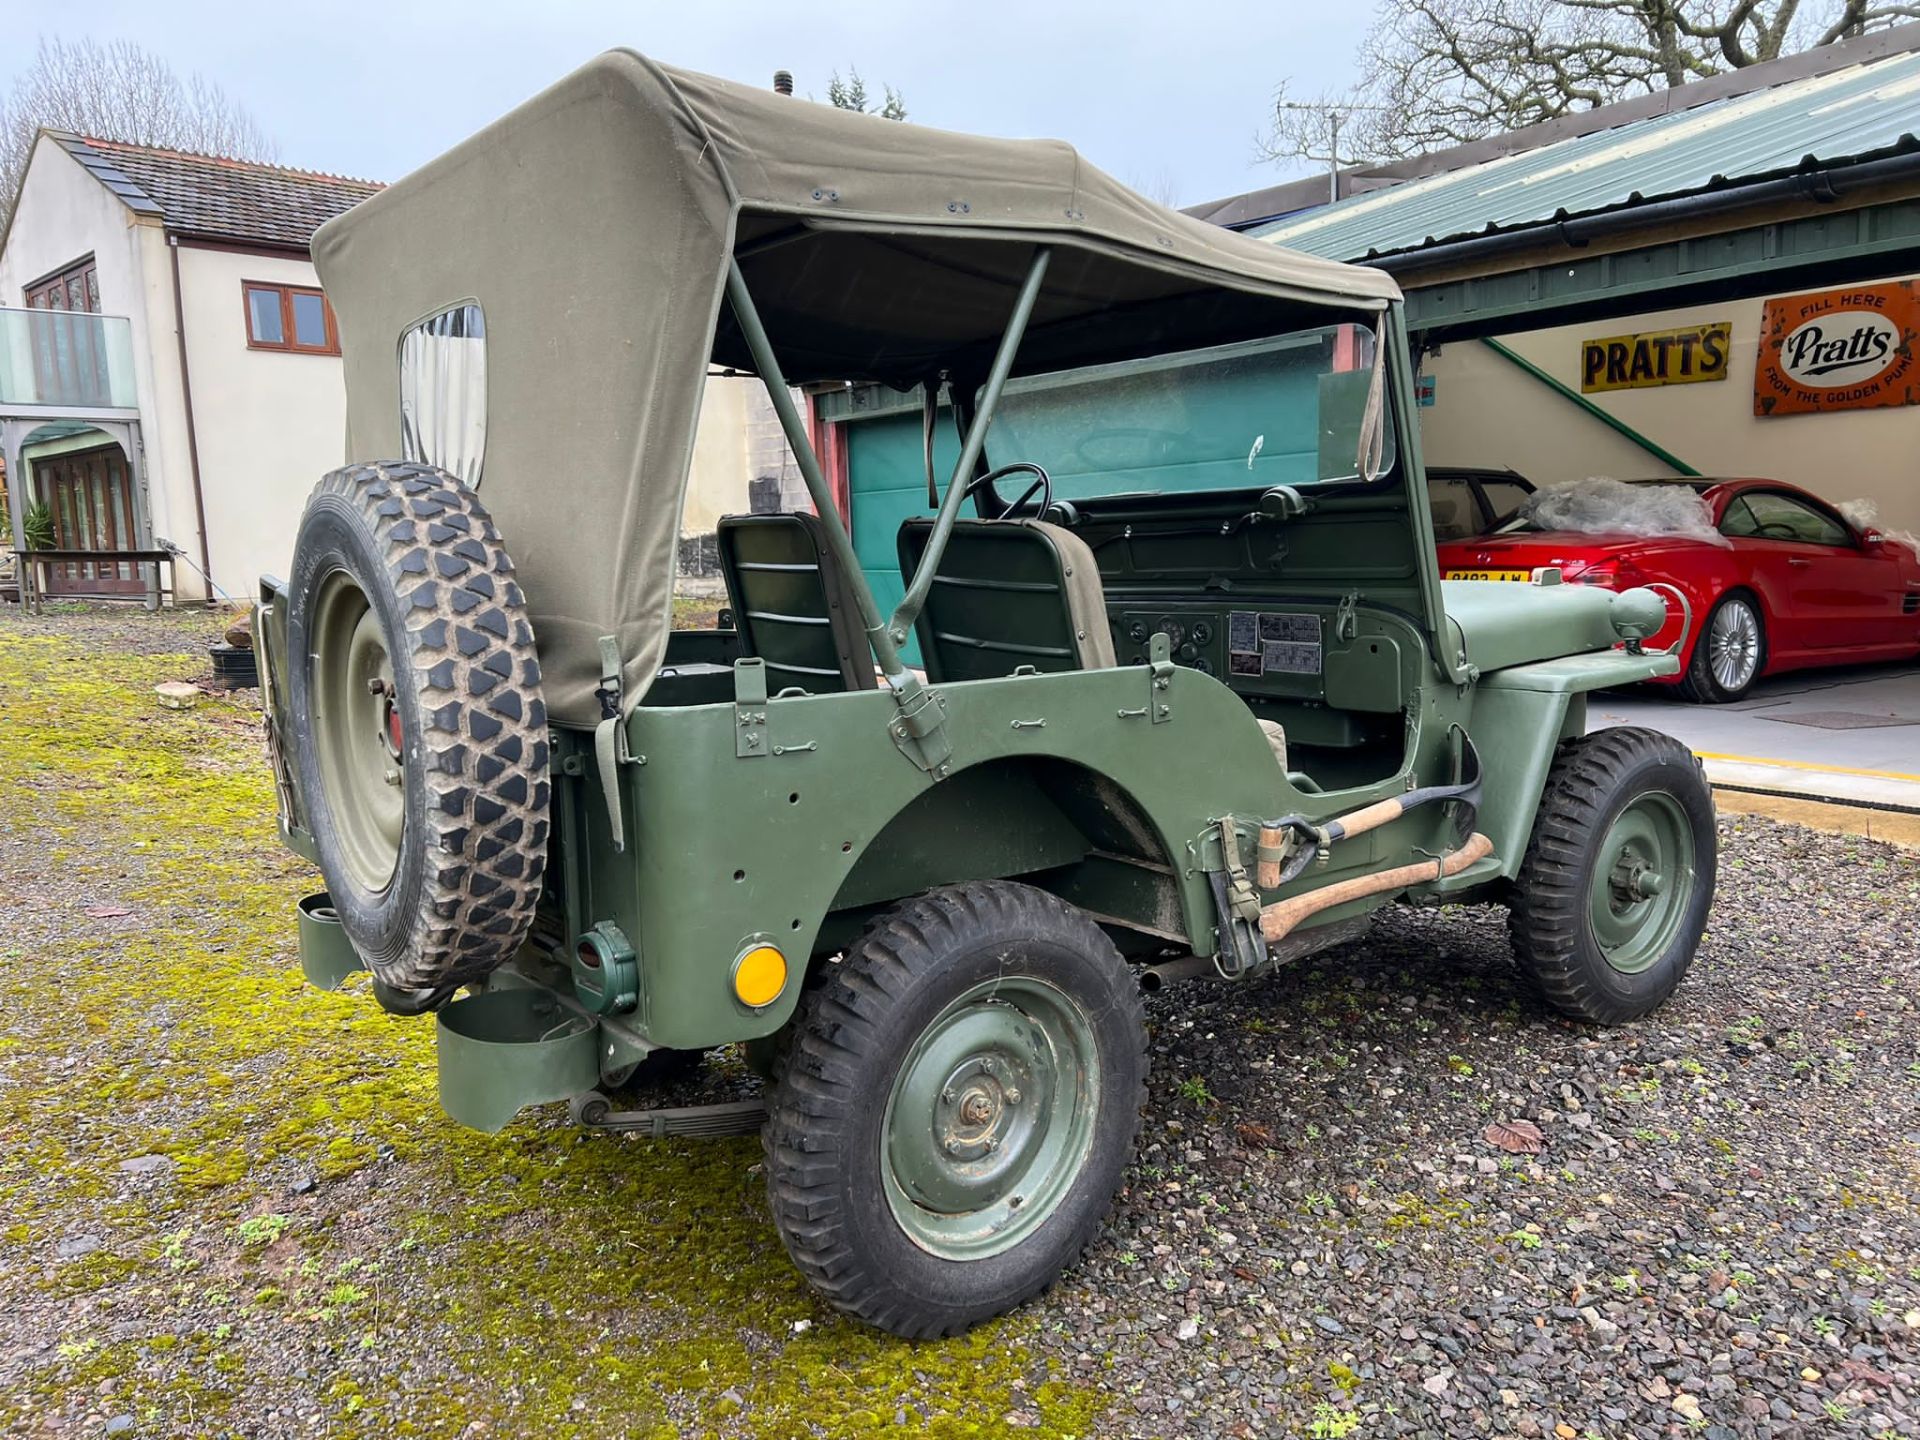 1945 Willys Jeep - Military Vehicle - Restored and raring to go... - Image 5 of 13